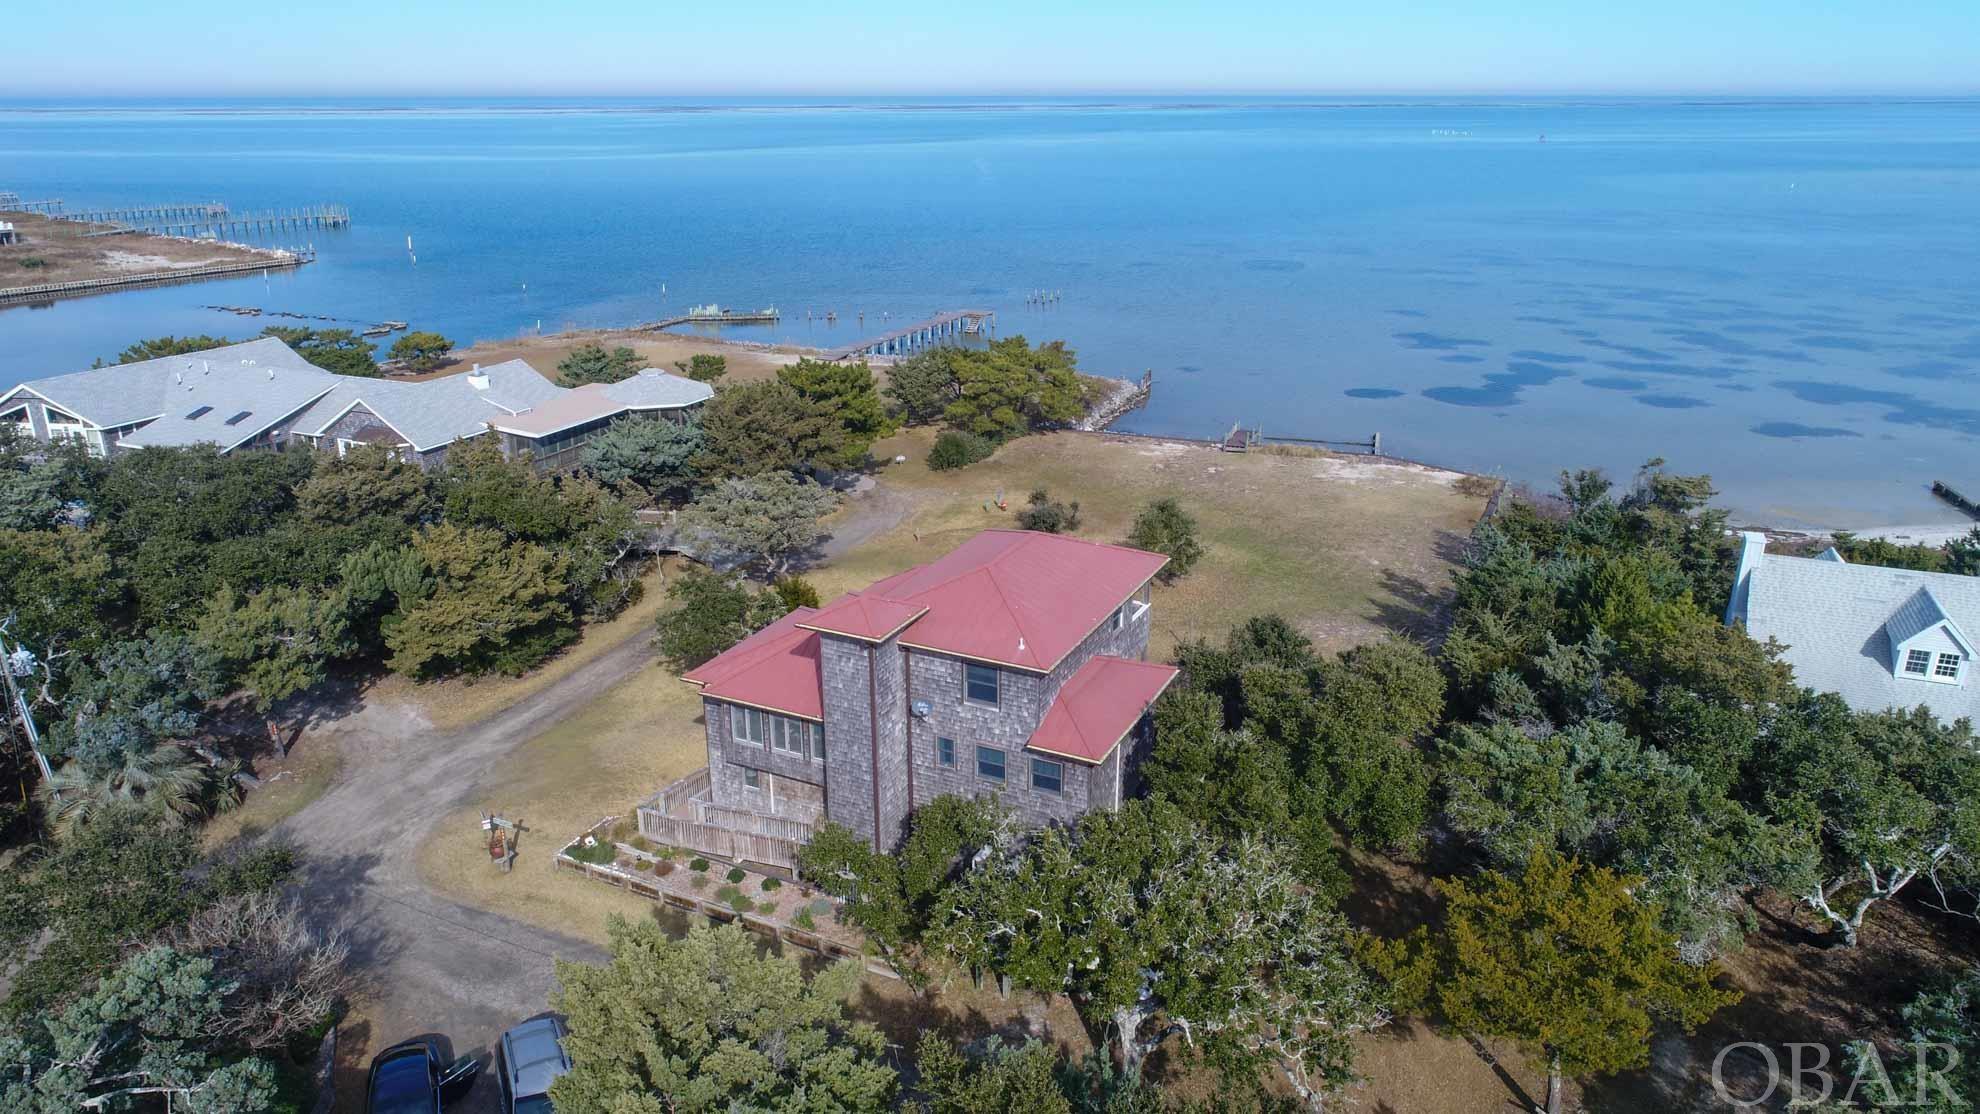 A beautiful, spacious, 4 bedroom/2 bath, 3-story home on a huge lot directly on the Pamlico Sound! This home has it all-a Trex ramp leading to 1st level, an elevator, new hurricane-rated windows looking out to the Sound, an additional living area with "murphy bed" on 3rd floor, a whole-house generator, and gas on-demand hot water heater. Unique hard wood floors, luxury vinyl on the first floor, custom tiling in the bathrooms and kitchen. An abundance of windows gives natural light and 2 covered porches with striking western red cedar ceilings  offer an unobstructed view of the sound- perfect for watching the passing boats and bird-watching. Large eat-in kitchen with custom cabinets (Hatteras Originals made in Frisco), stainless steel appliances, gas stove, granite counter-tops and a back-splash with hand-made tiles. Custom walk-in closet. There is a nice grassed yard leading to more than 100' on the Pamlico Sound- with a bulkhead with a small dock. The home was built in 3 stages- beginning in 2006, finishing in 2009 and sits on over 21,000 sf at the end of a private road in coveted Sound Shores. Metal roof and sprayed insulation in all external walls, roof and floors.